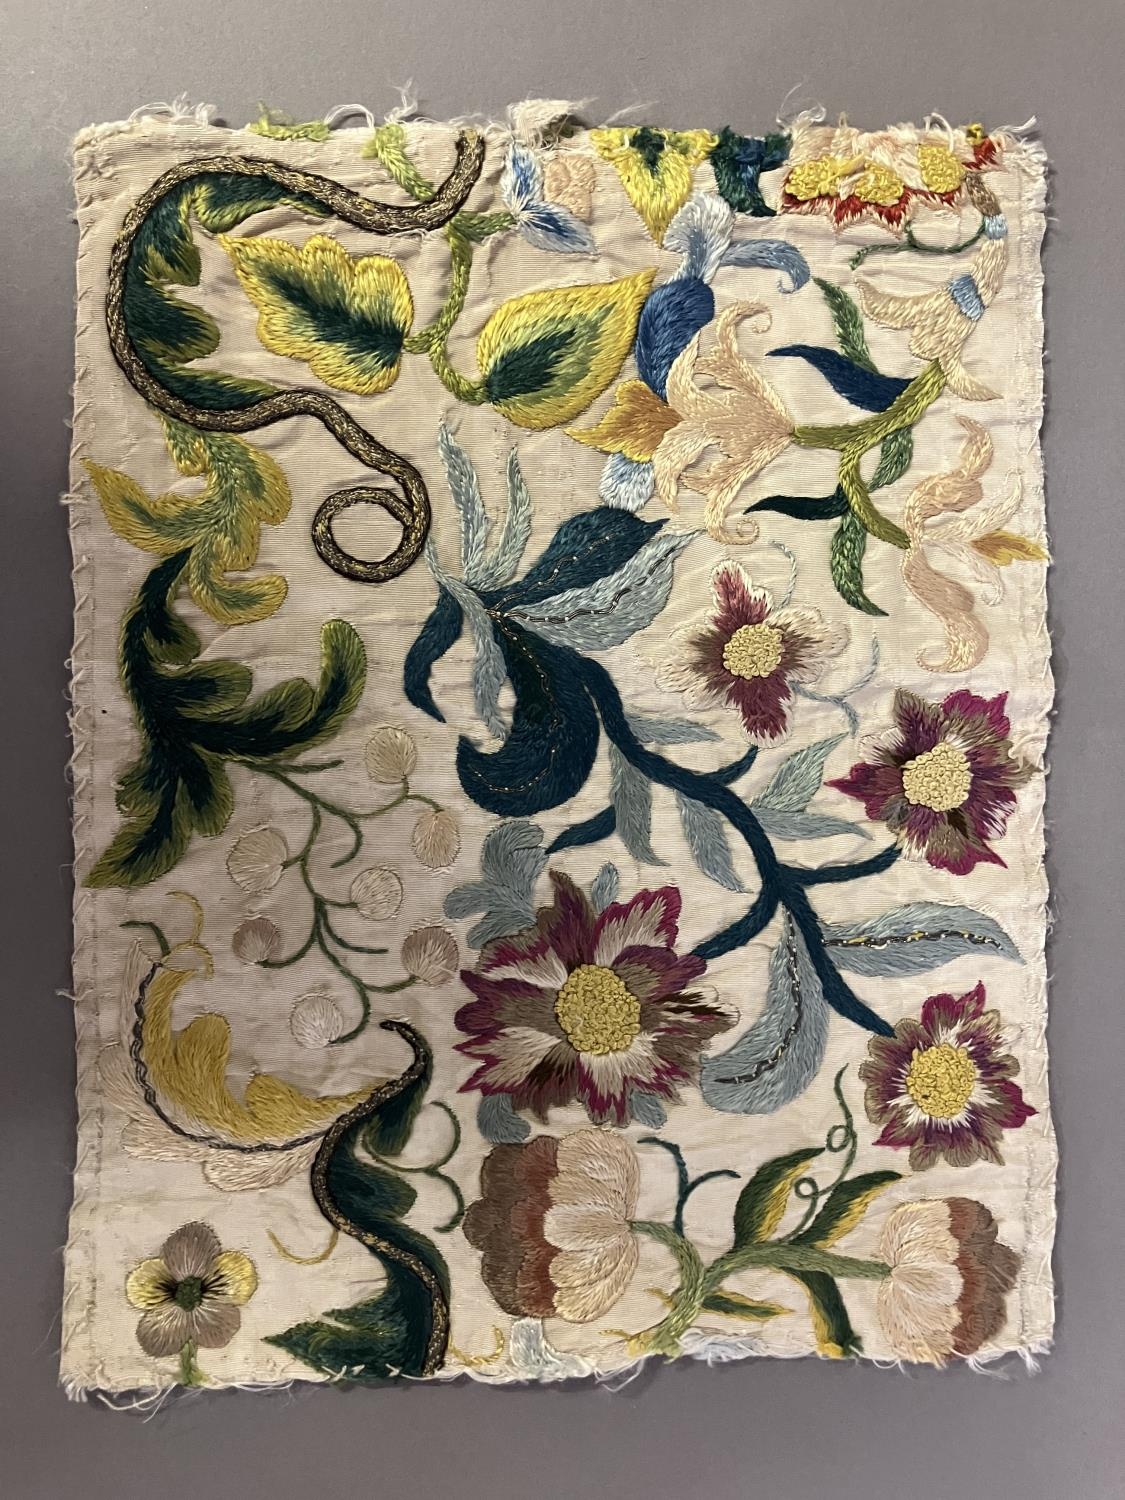 18th and 19th century needlework samplers and embroideries: the first, a European stitch sampler - Image 2 of 4